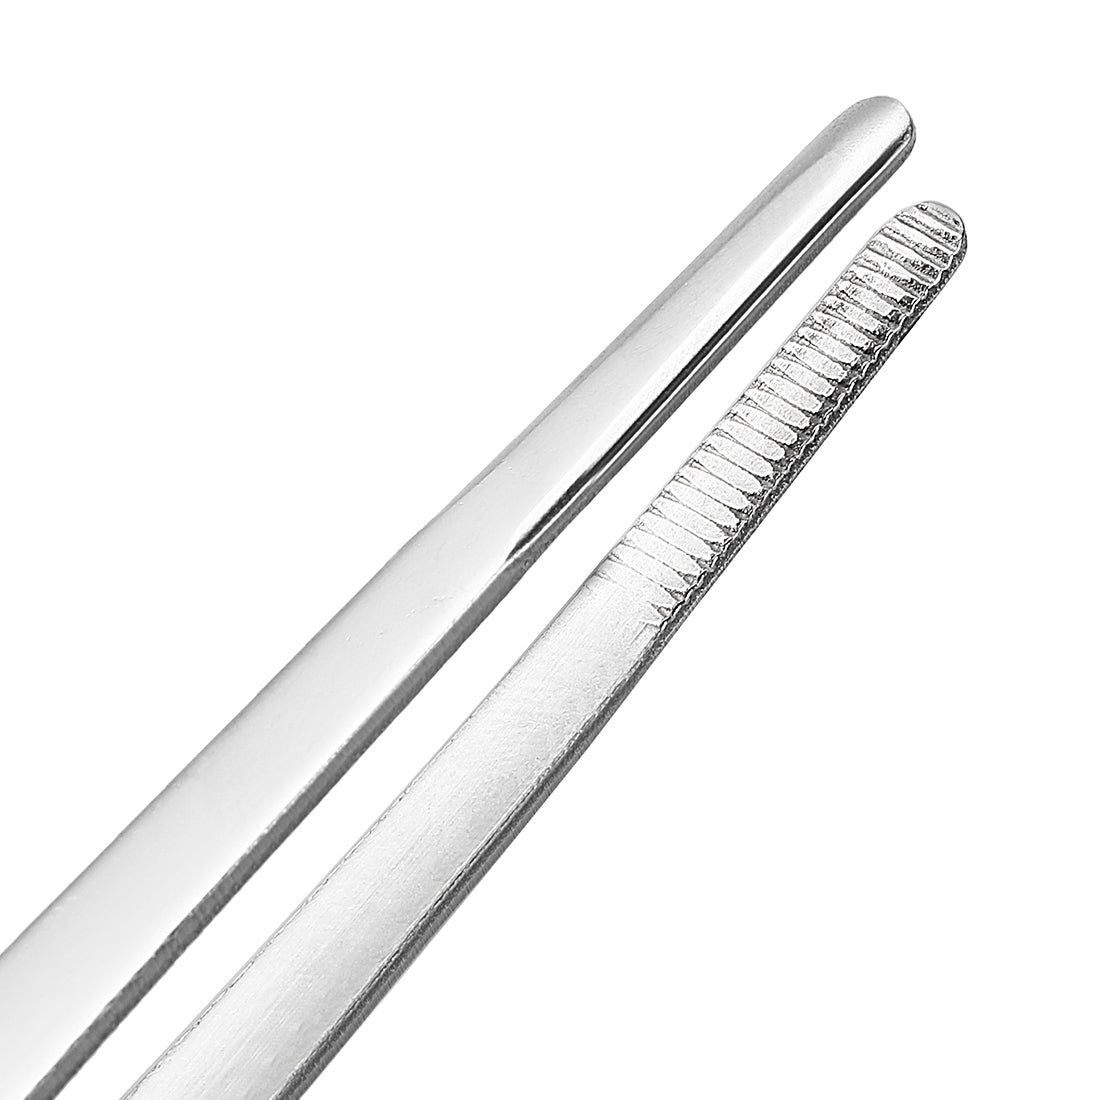 uxcell Uxcell 1 Pcs Stainless Steel Straight Blunt Tweezers Serrated Tip,10 Inch